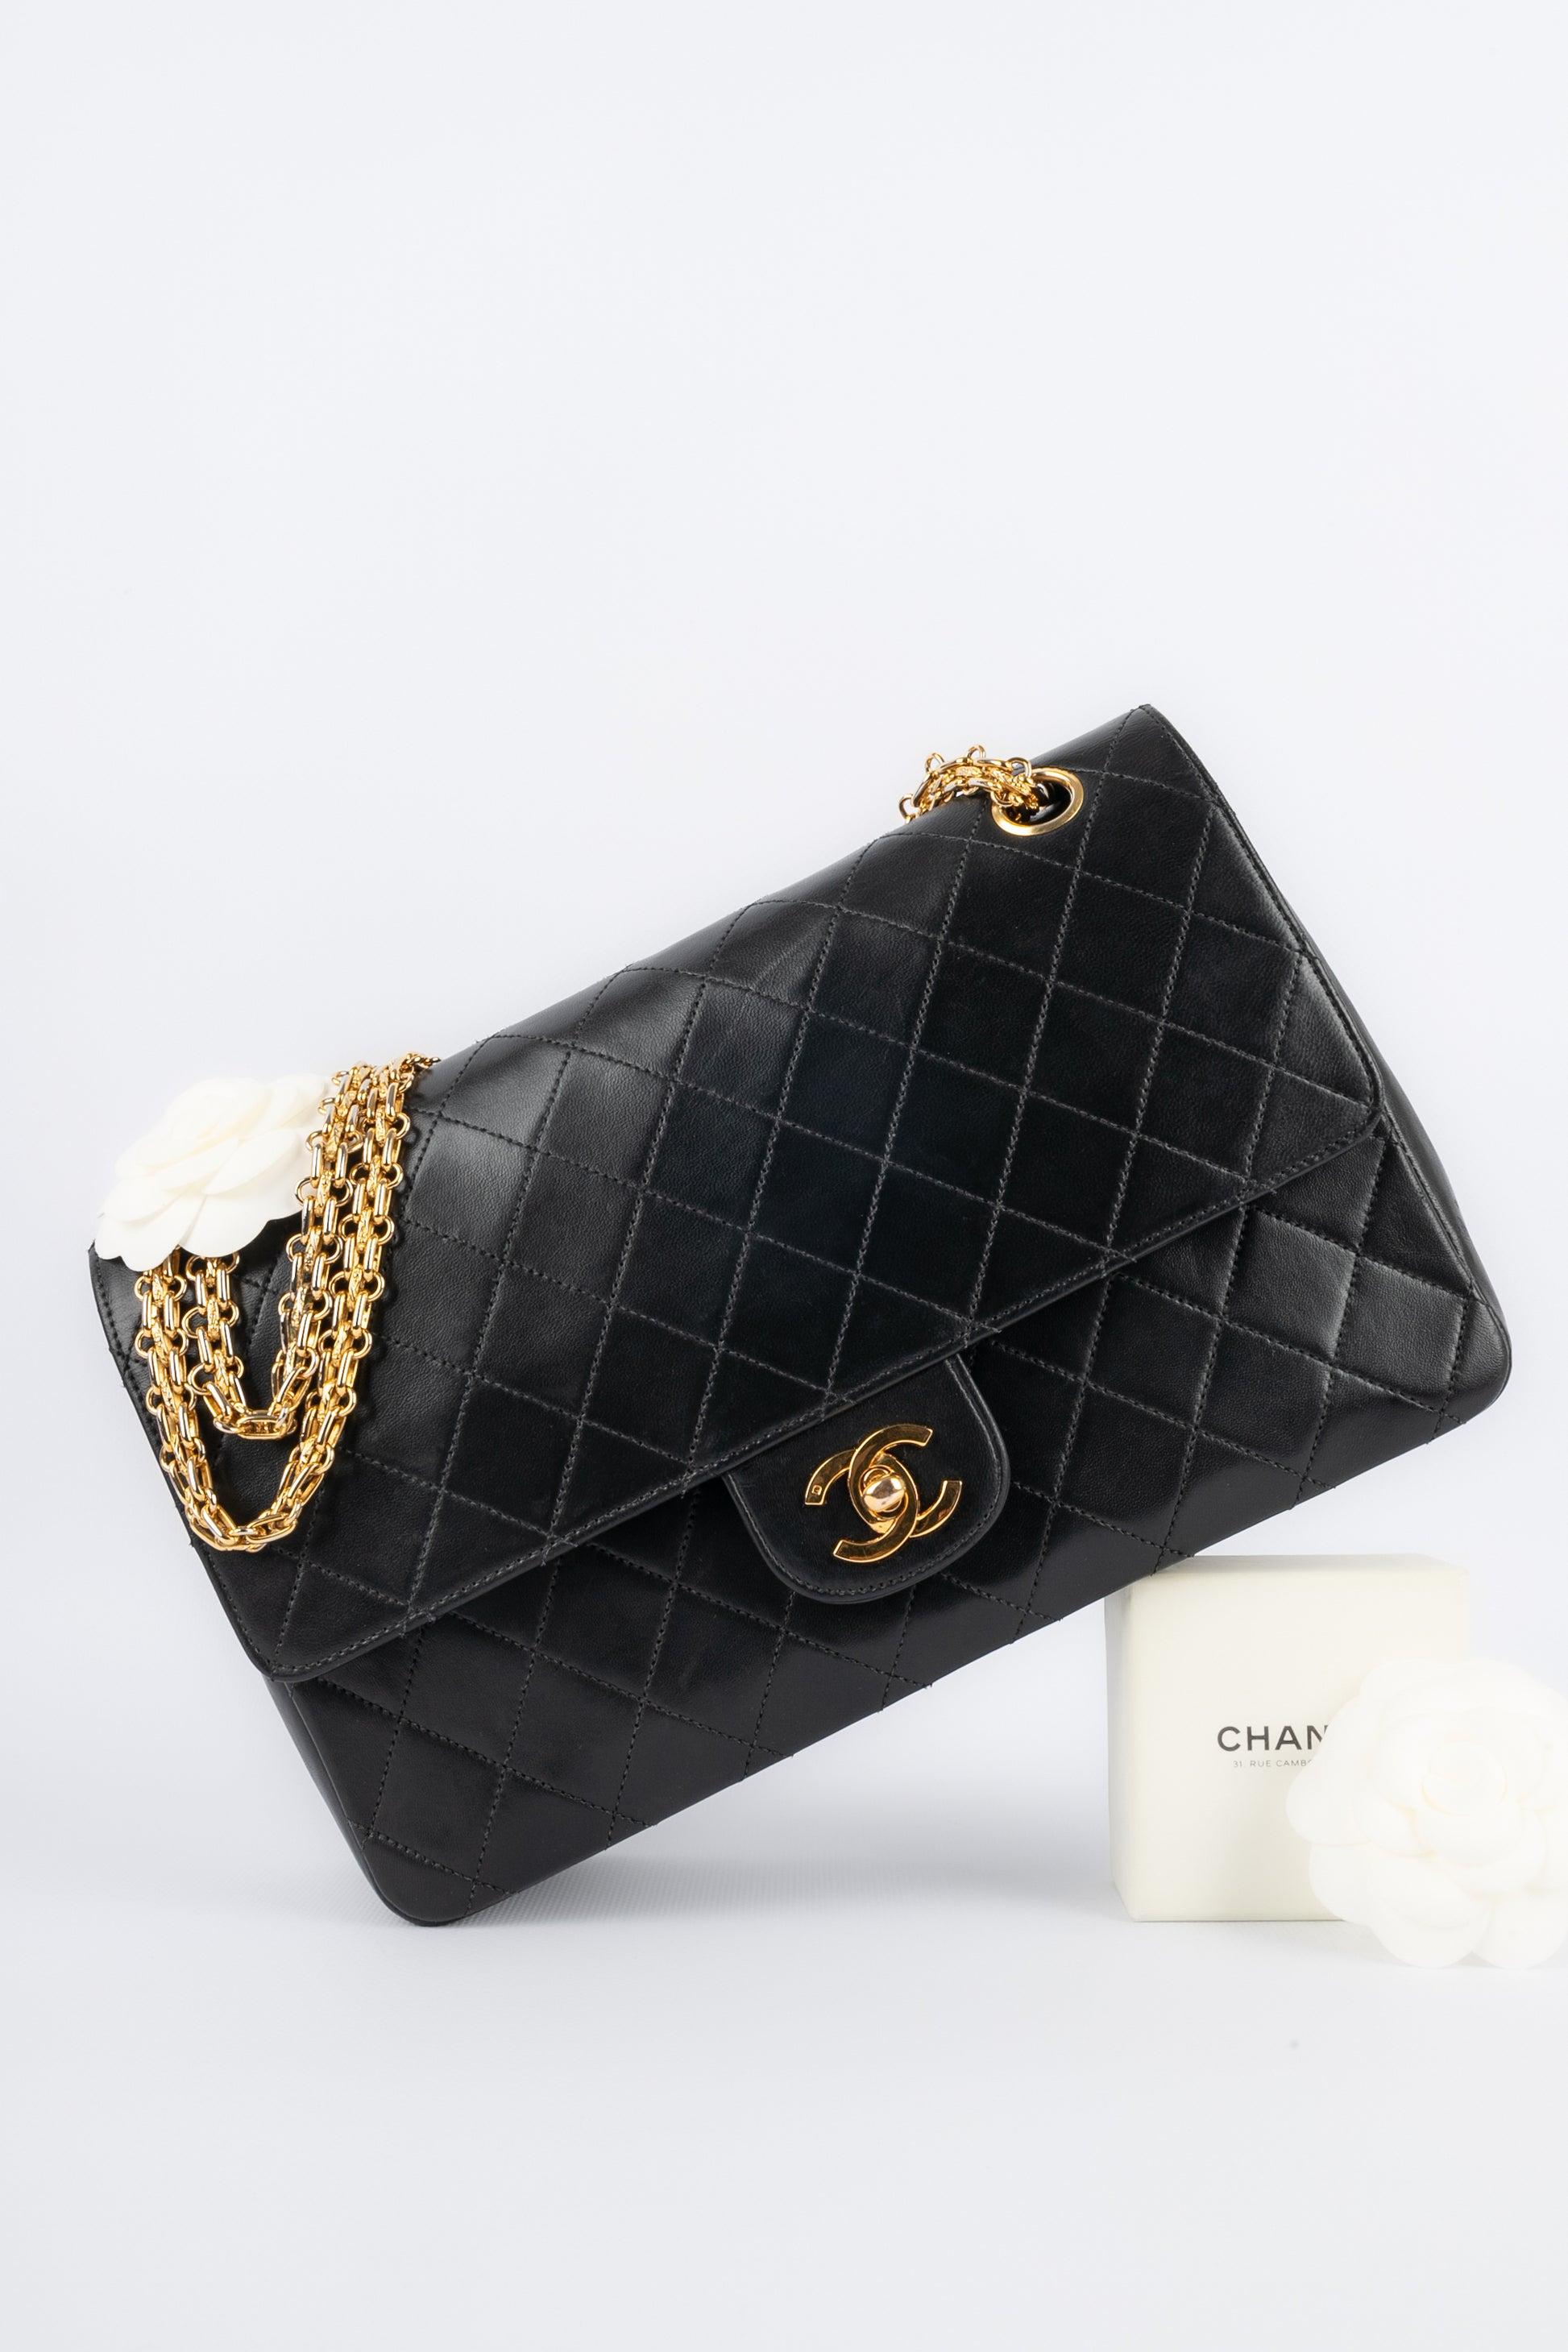 Chanel Quilted Black Lambskin Timeless Bag, 1997/1999 For Sale 6